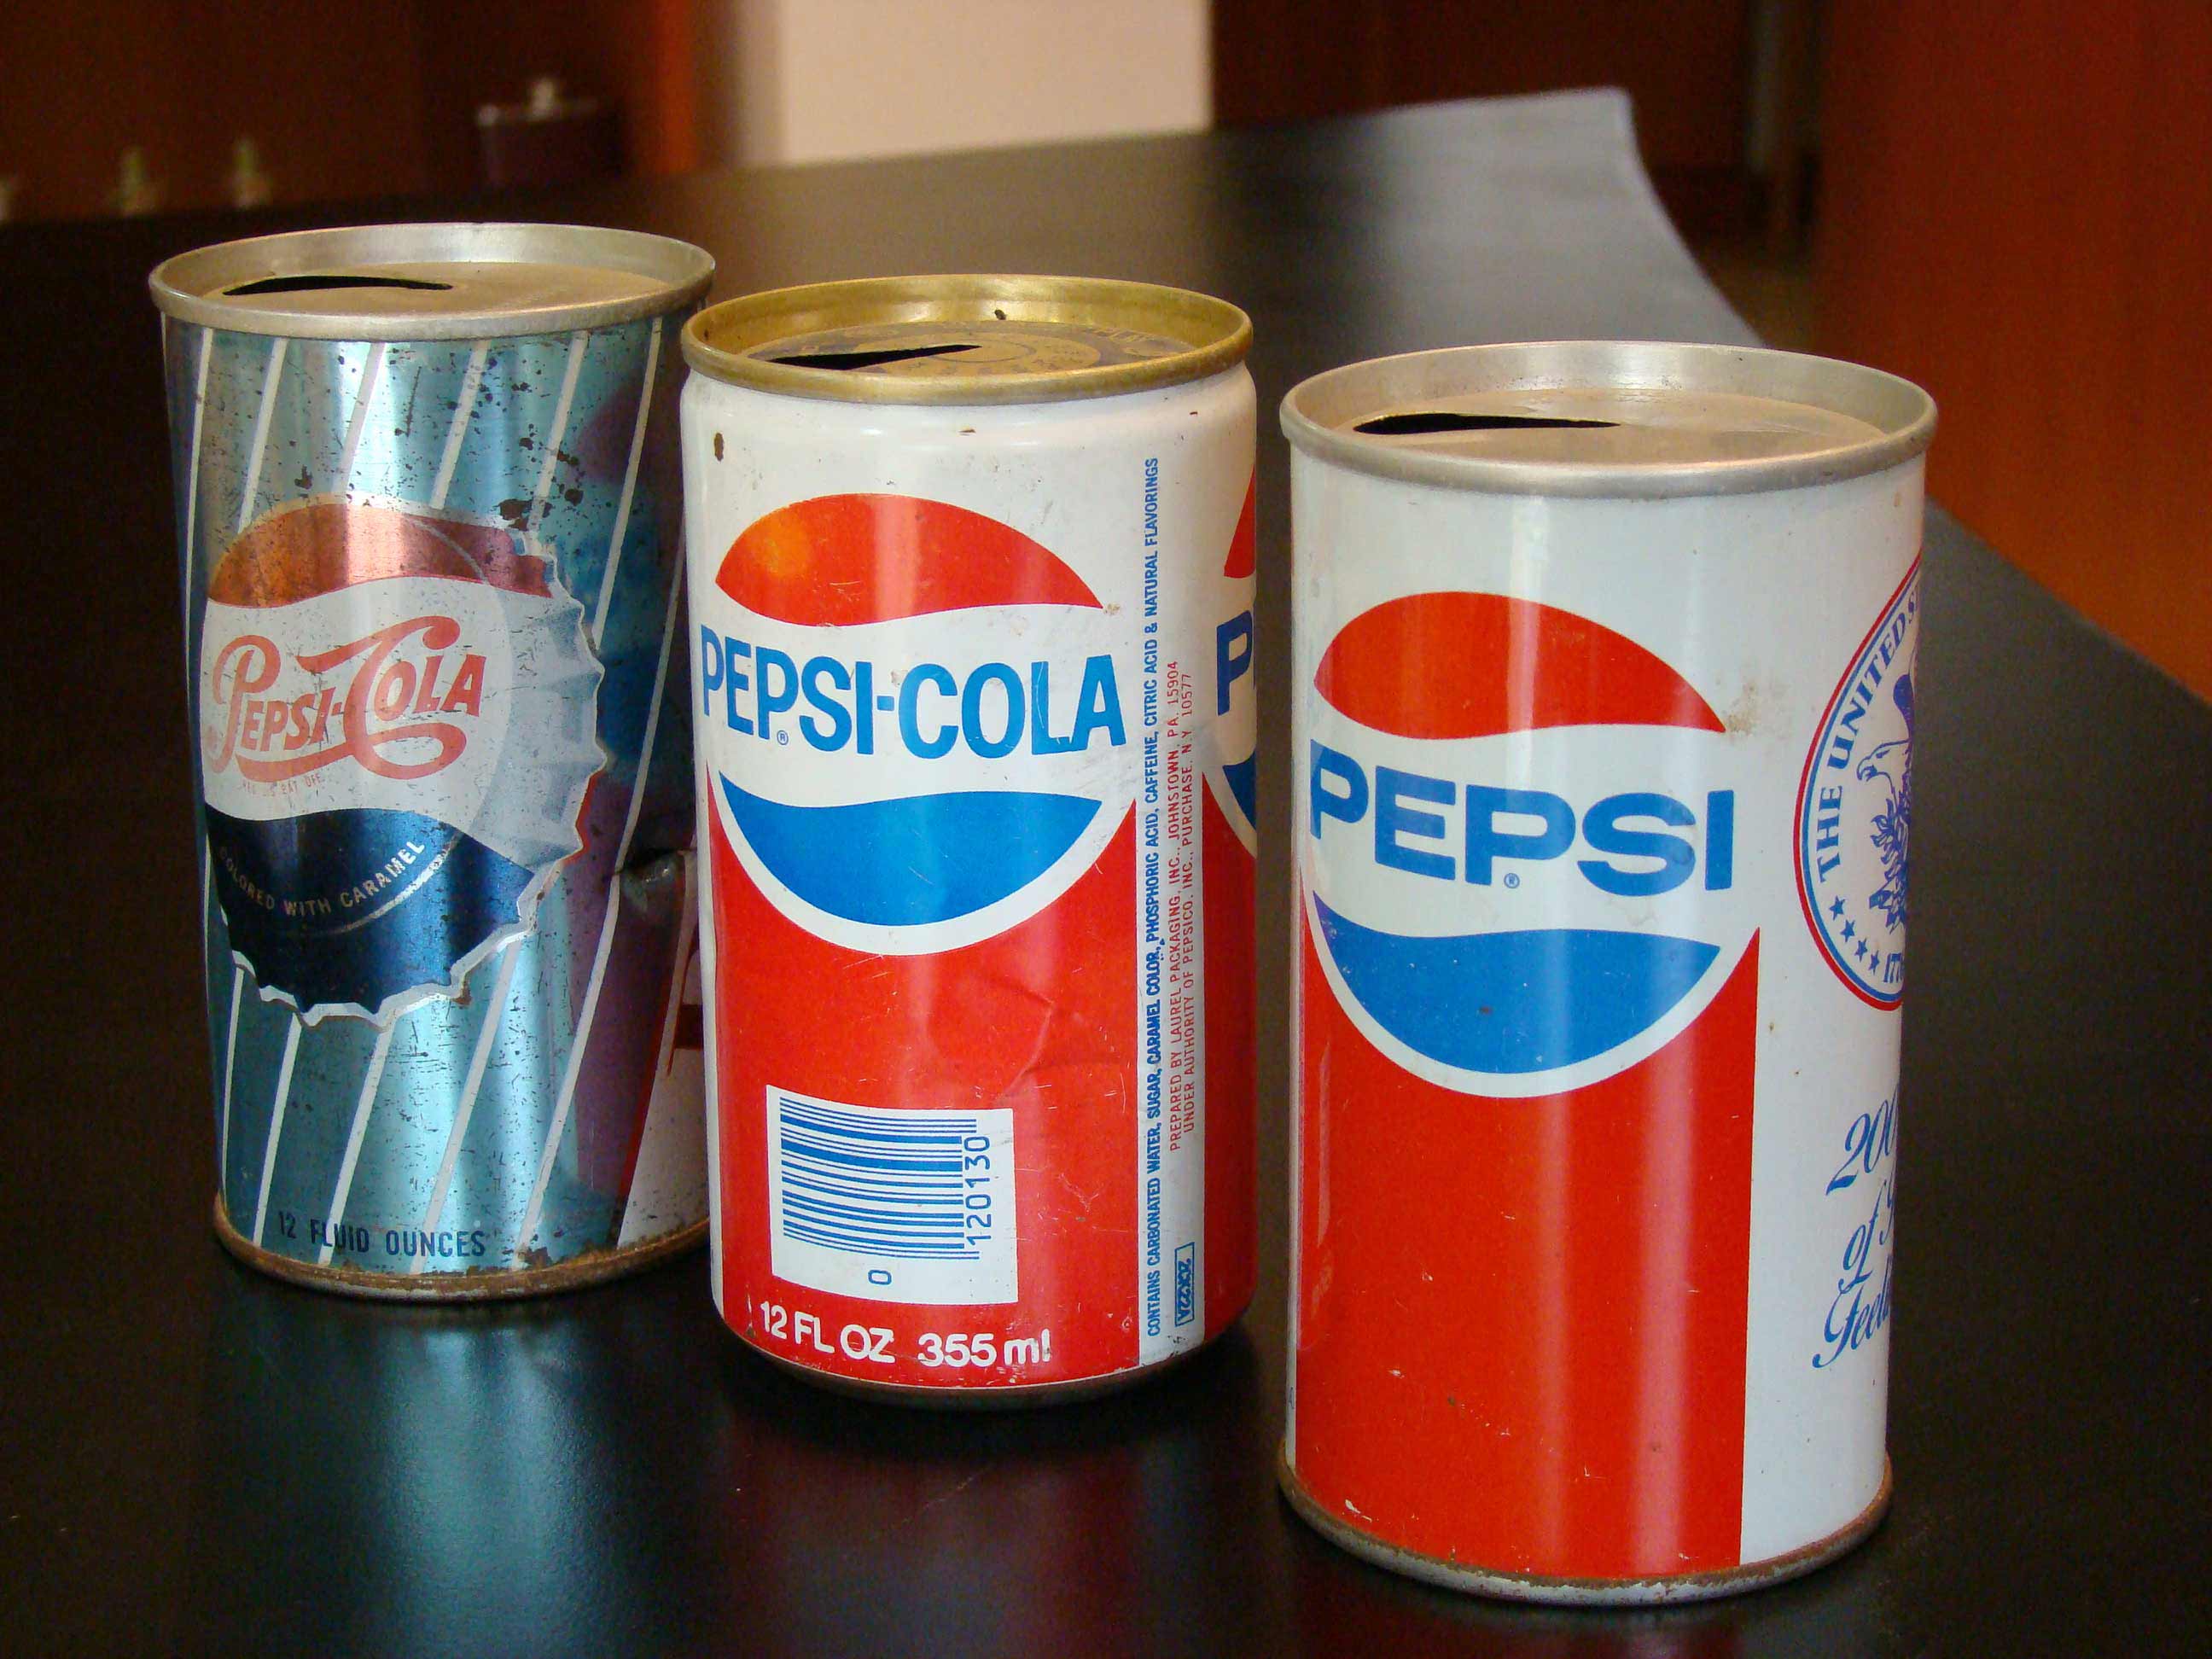 Tracing the evolution of Pepsi cans